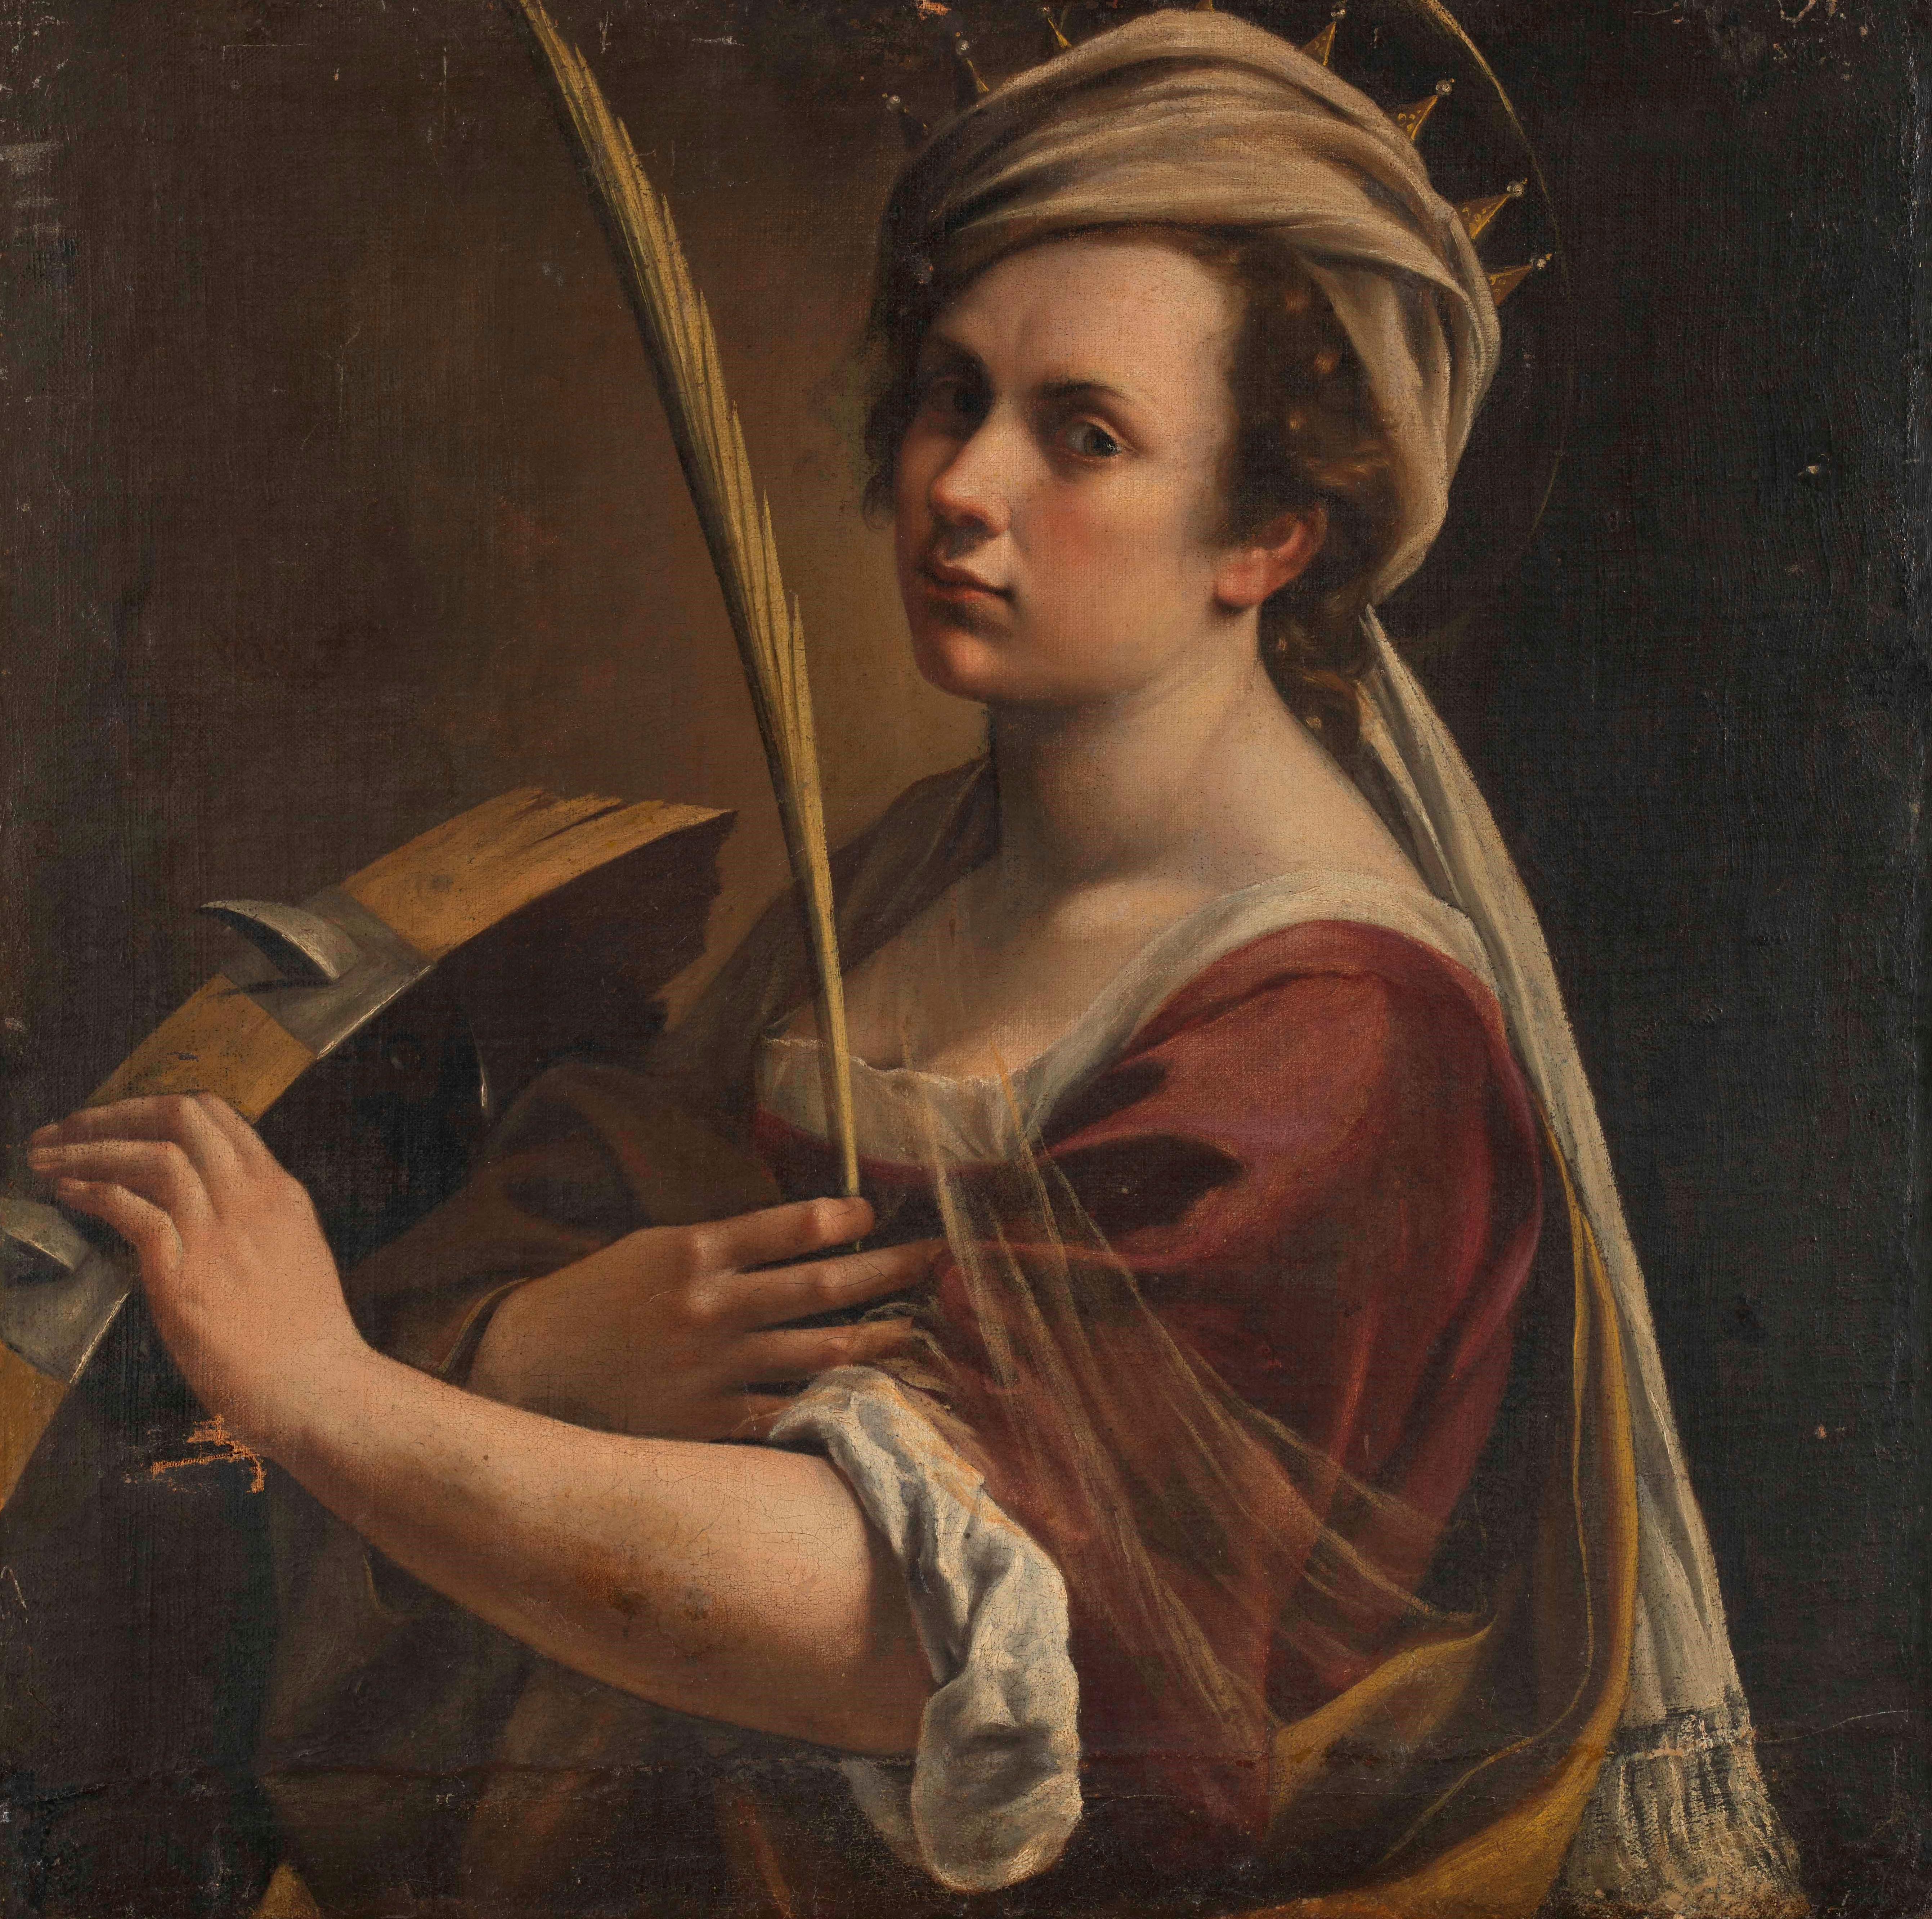 Circa-1616 self-portrait of Artemisia Gentileschi as Saint Catherine of Alexandria. On July 19, Italian police announced they had halted the potentially illegal auction of a different work by the famed Italian woman artist. Image courtesy of Wikimedia Commons, which states the work is in the public domain in the United States because it was published or registered with the U.S. Copyright Office before January 1, 1927.